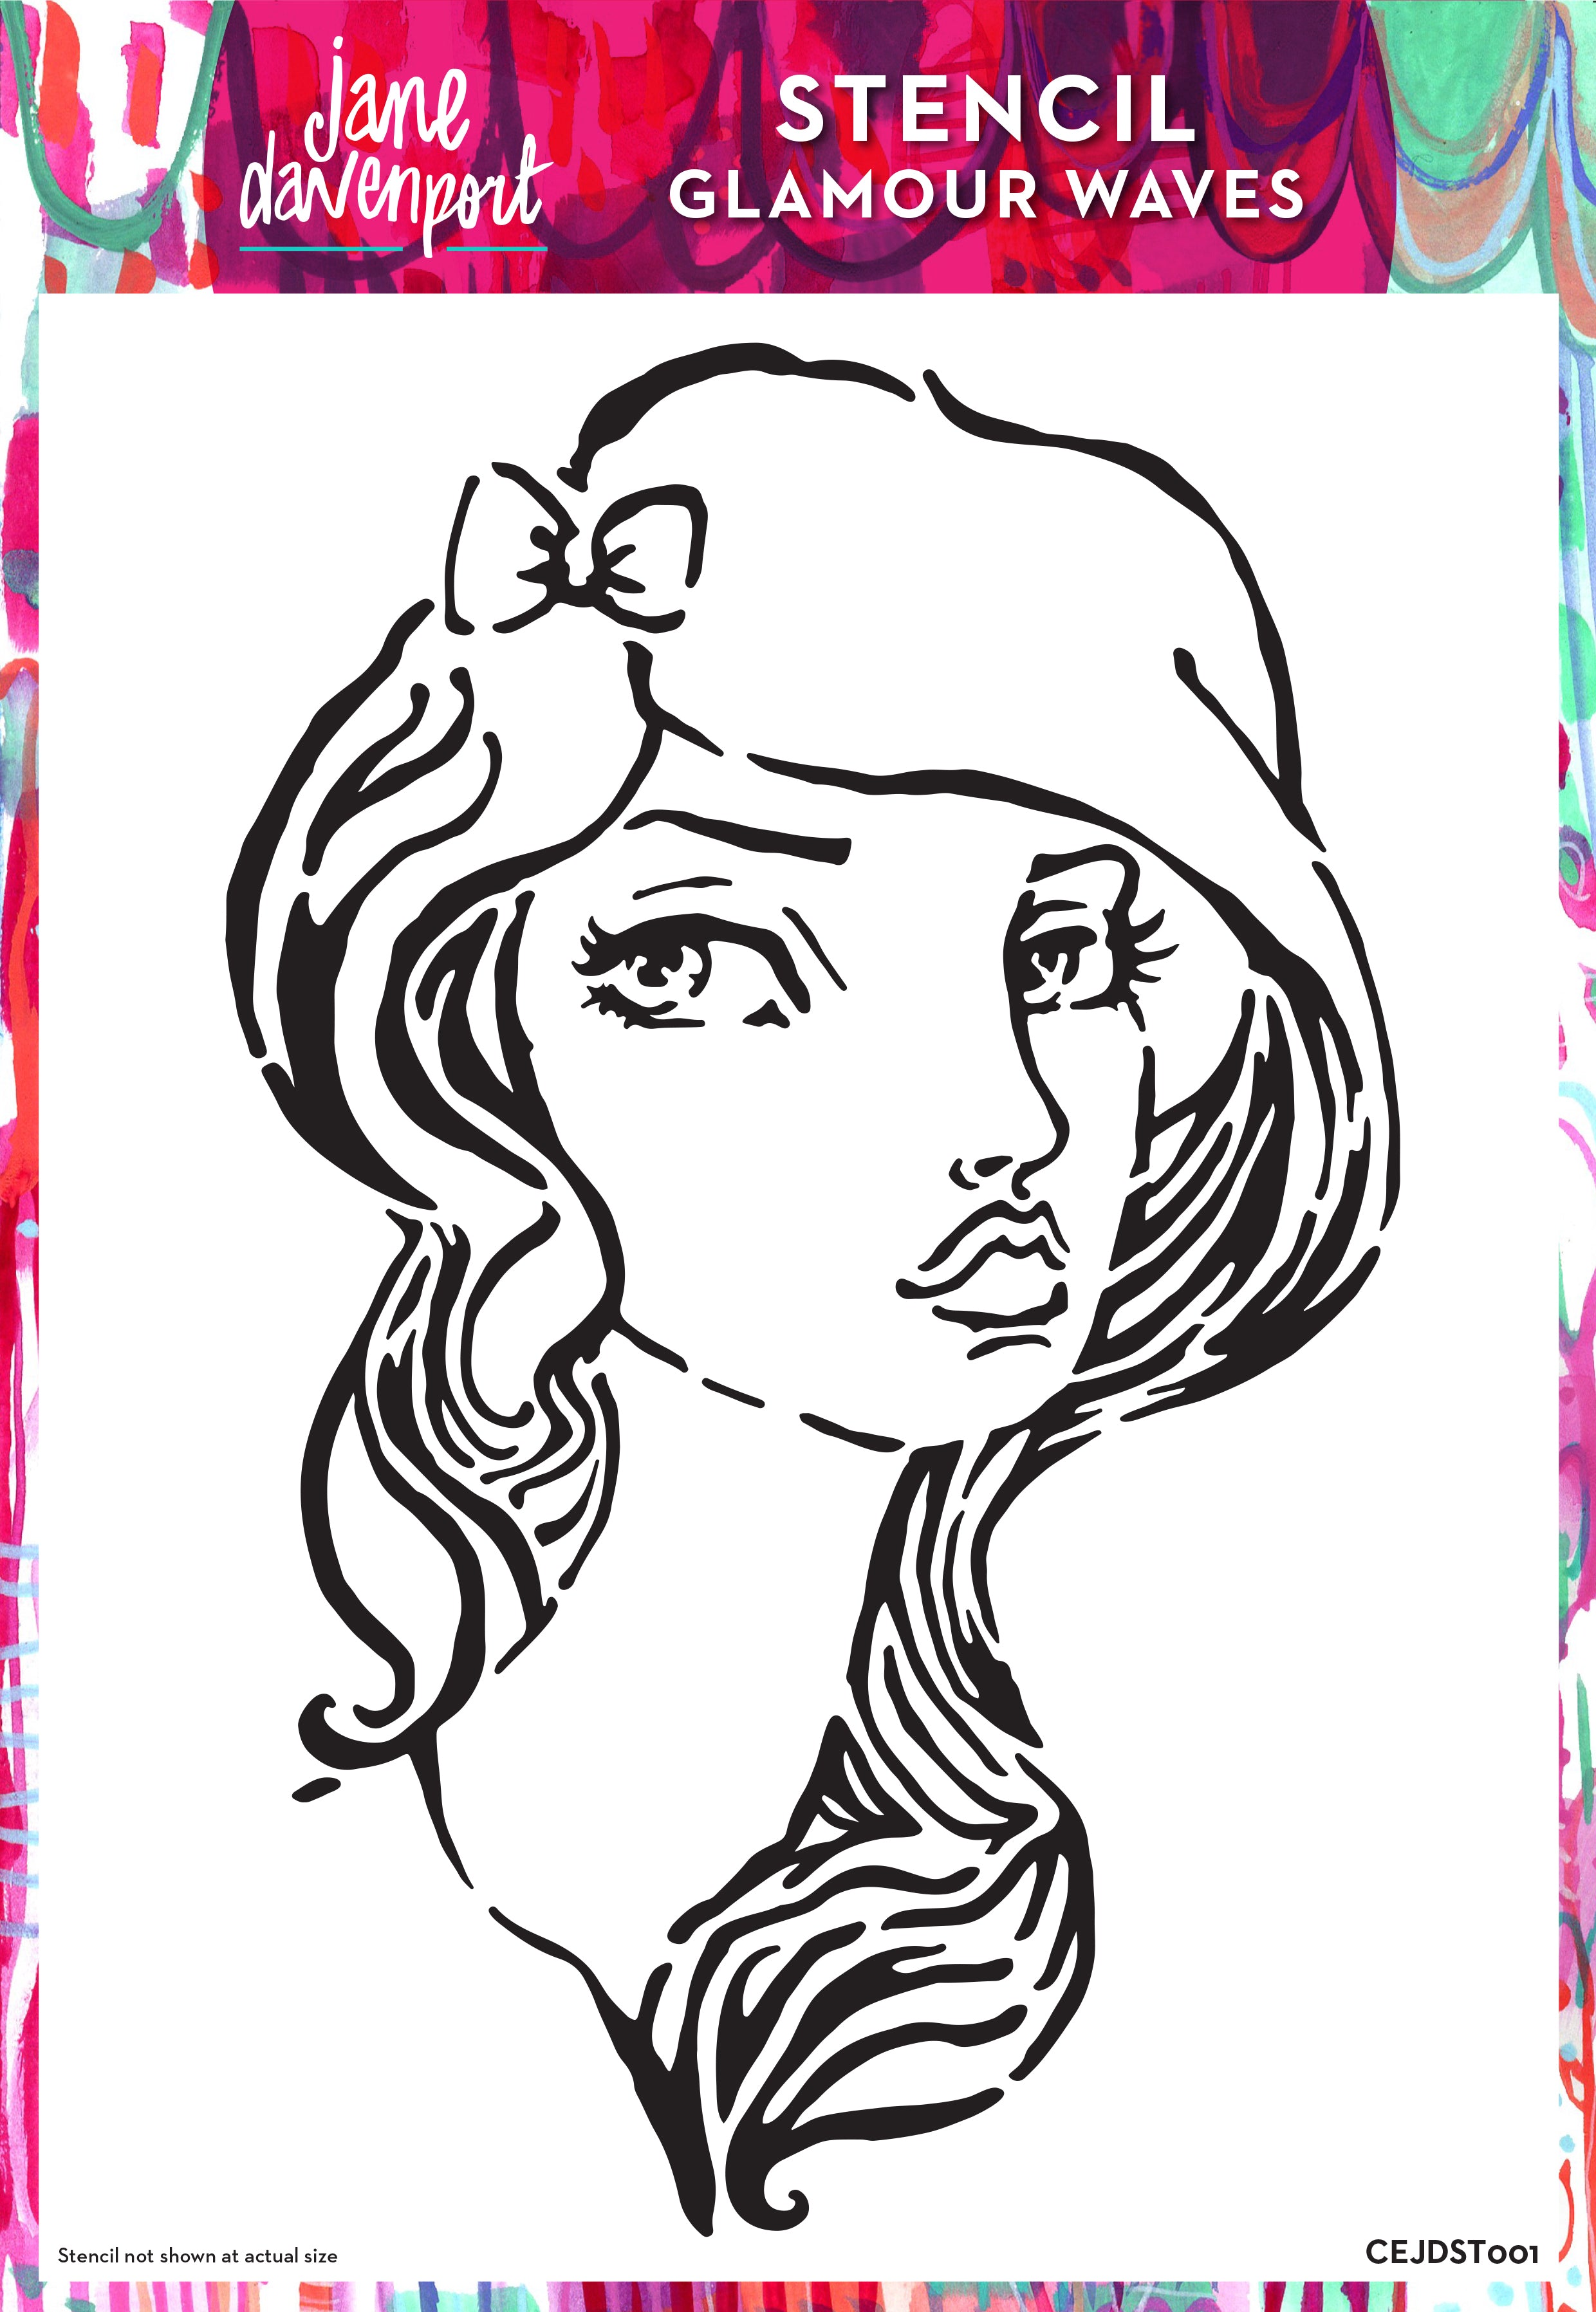 Creative Expressions Jane Davenport Glamour Waves 8 in x 12 in Stencil